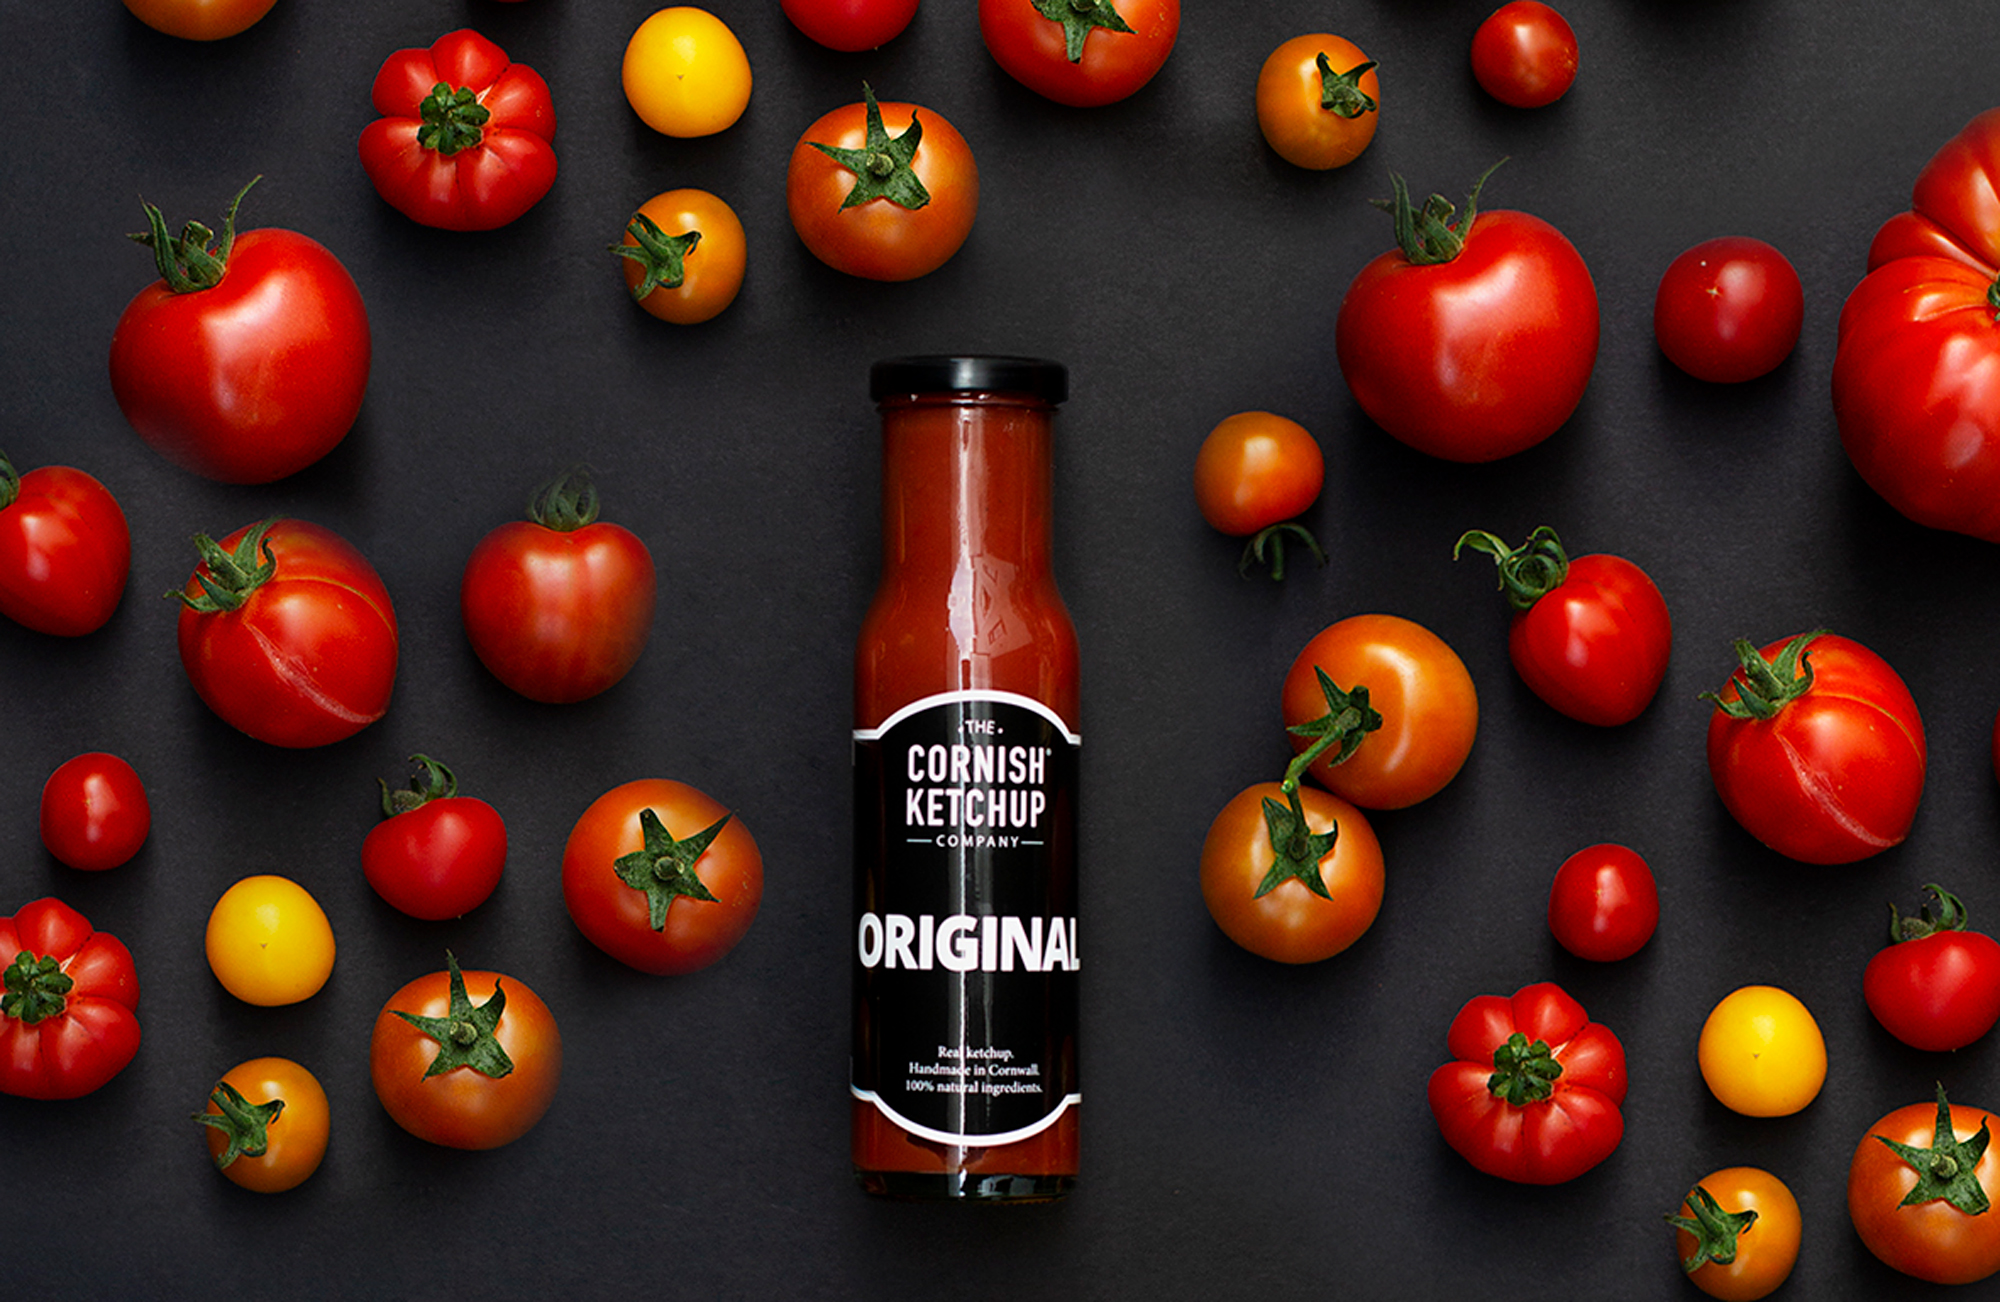 A bottle of Cornish Ketchup on black background surrounded by all sorts of different types of tomatoes